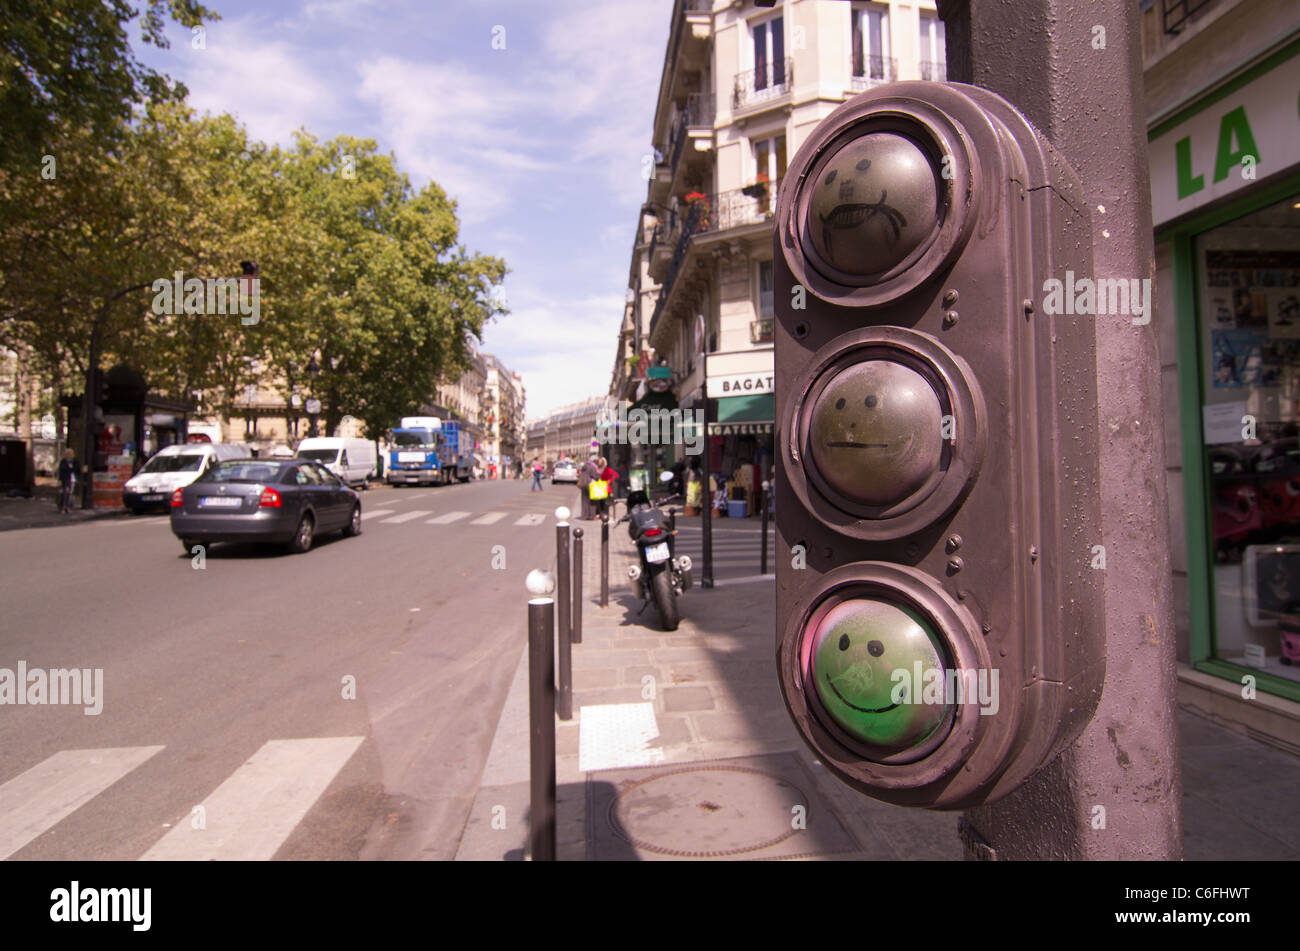 Traffic lights graffitied with faces for amusement onb the Rue Monge in paris, France Stock Photo